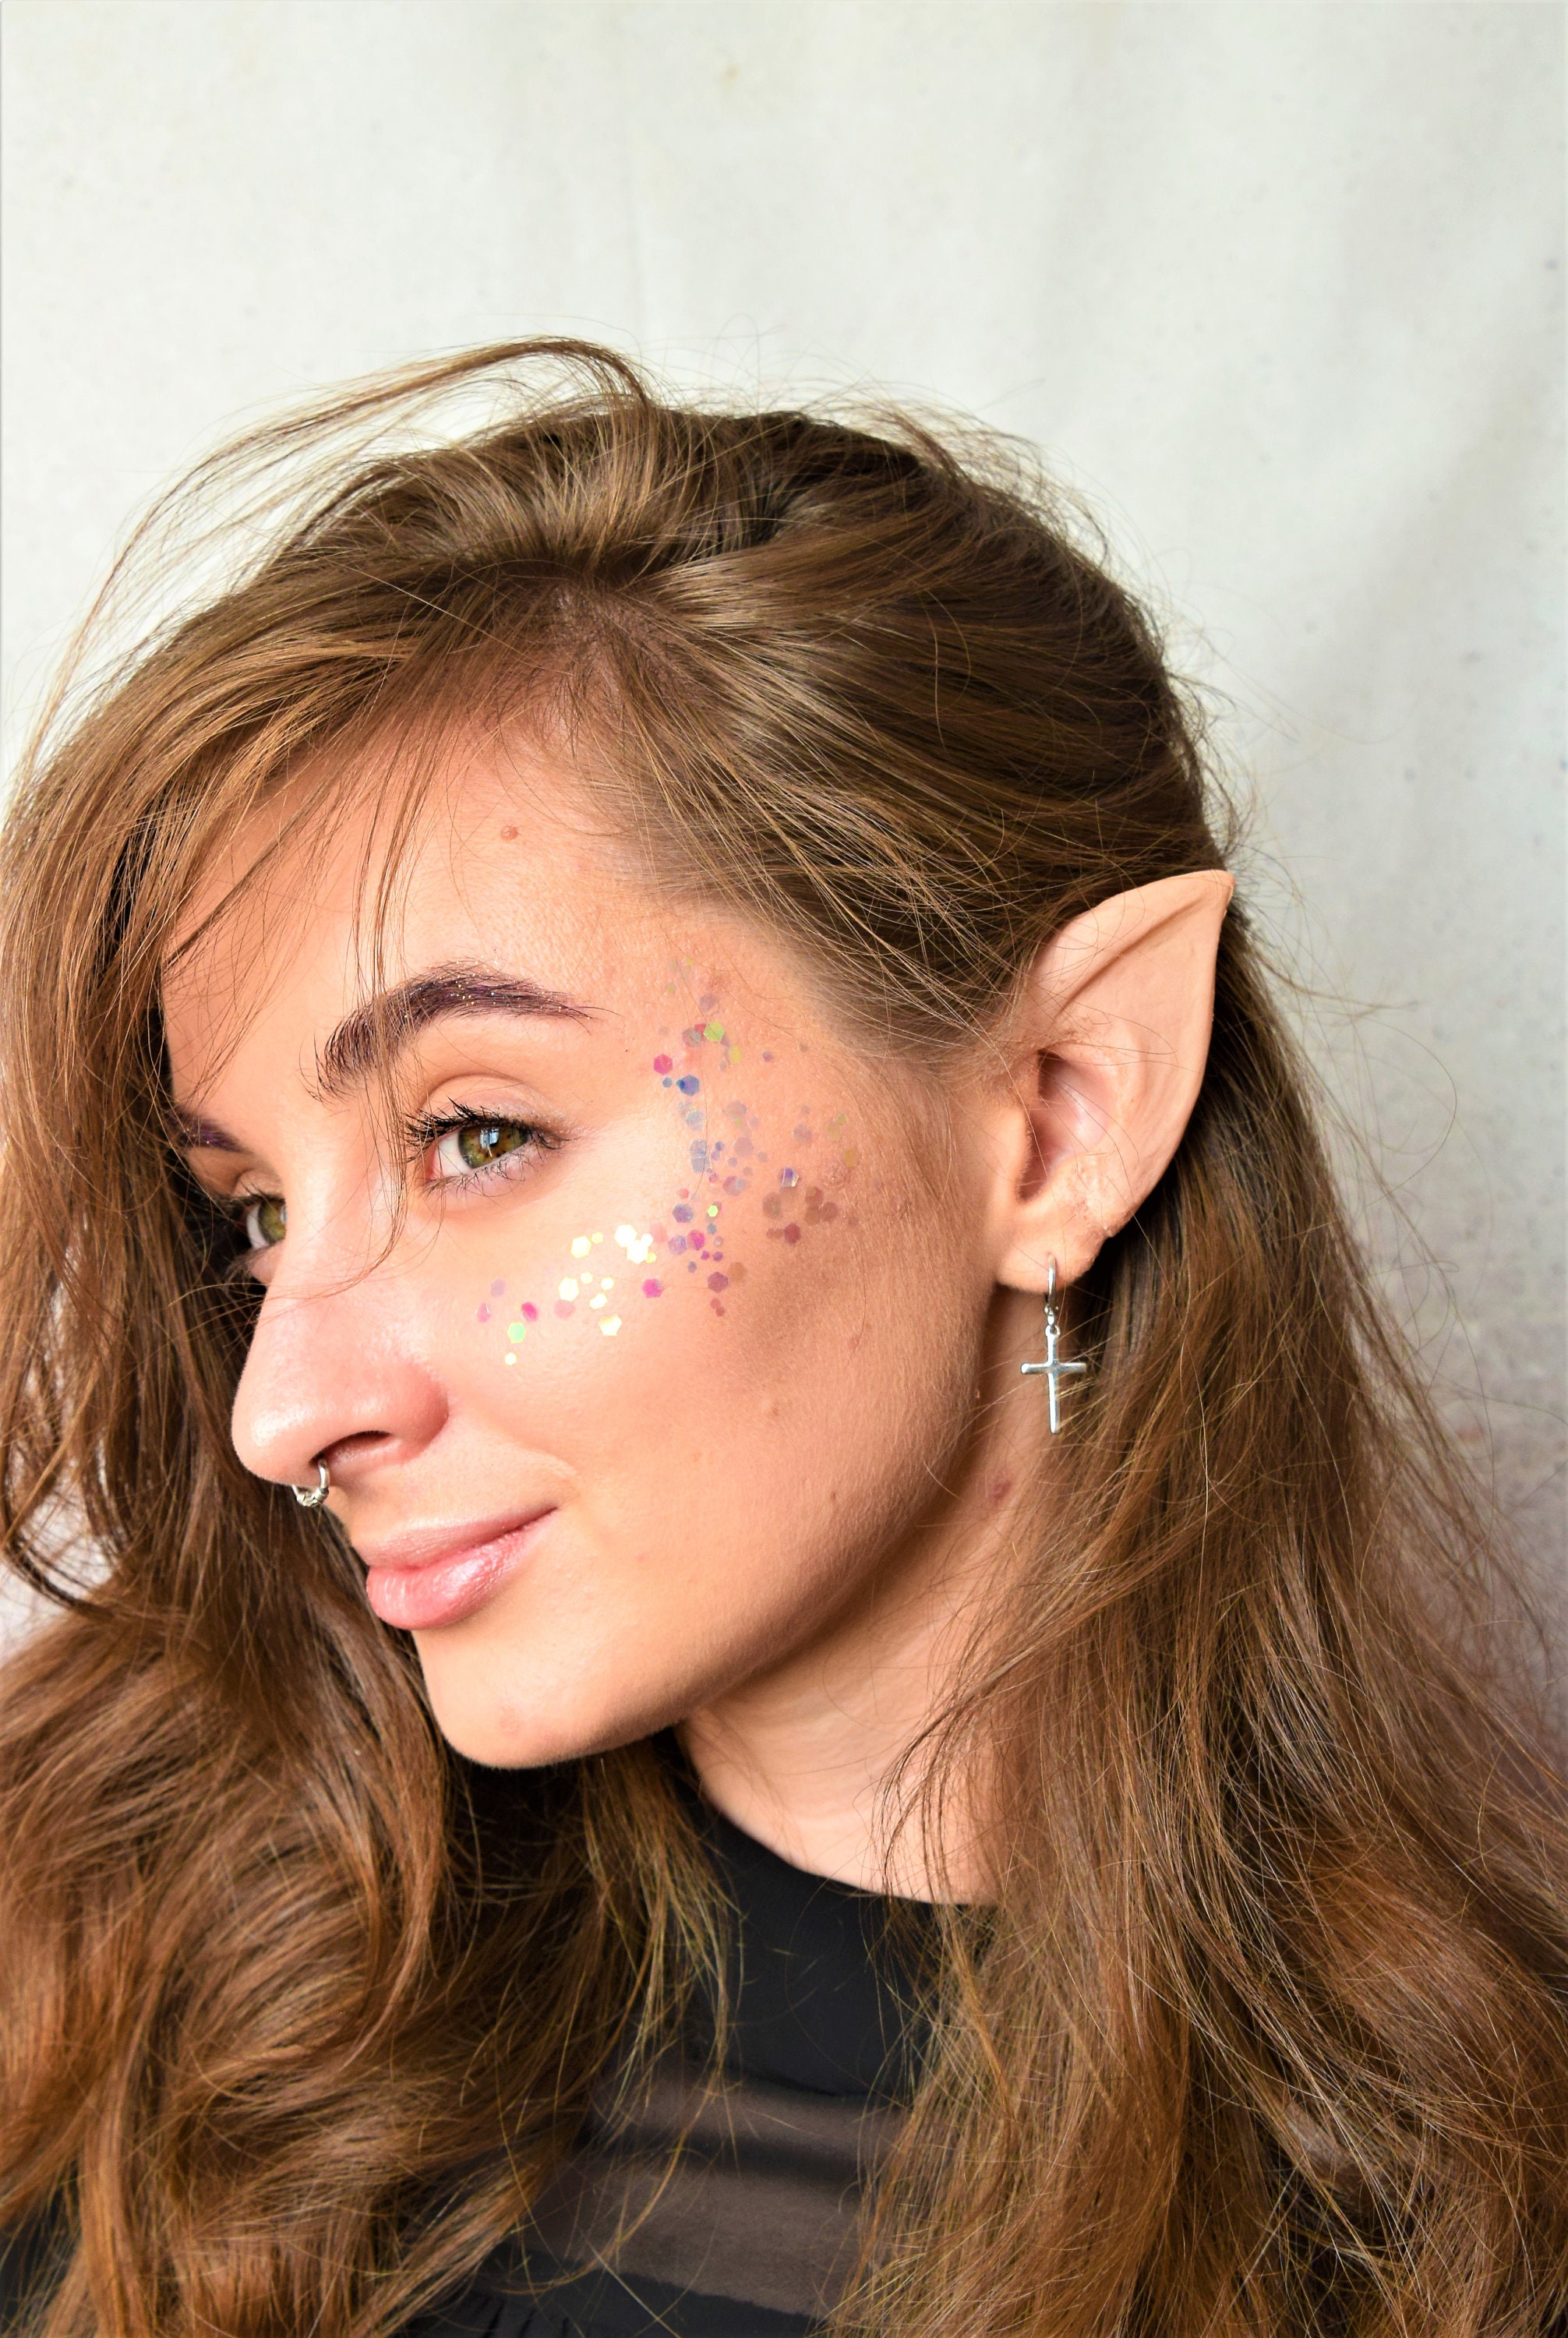 Will eyelash glue hold our elf ears? #renfaire #convergence #evermorep